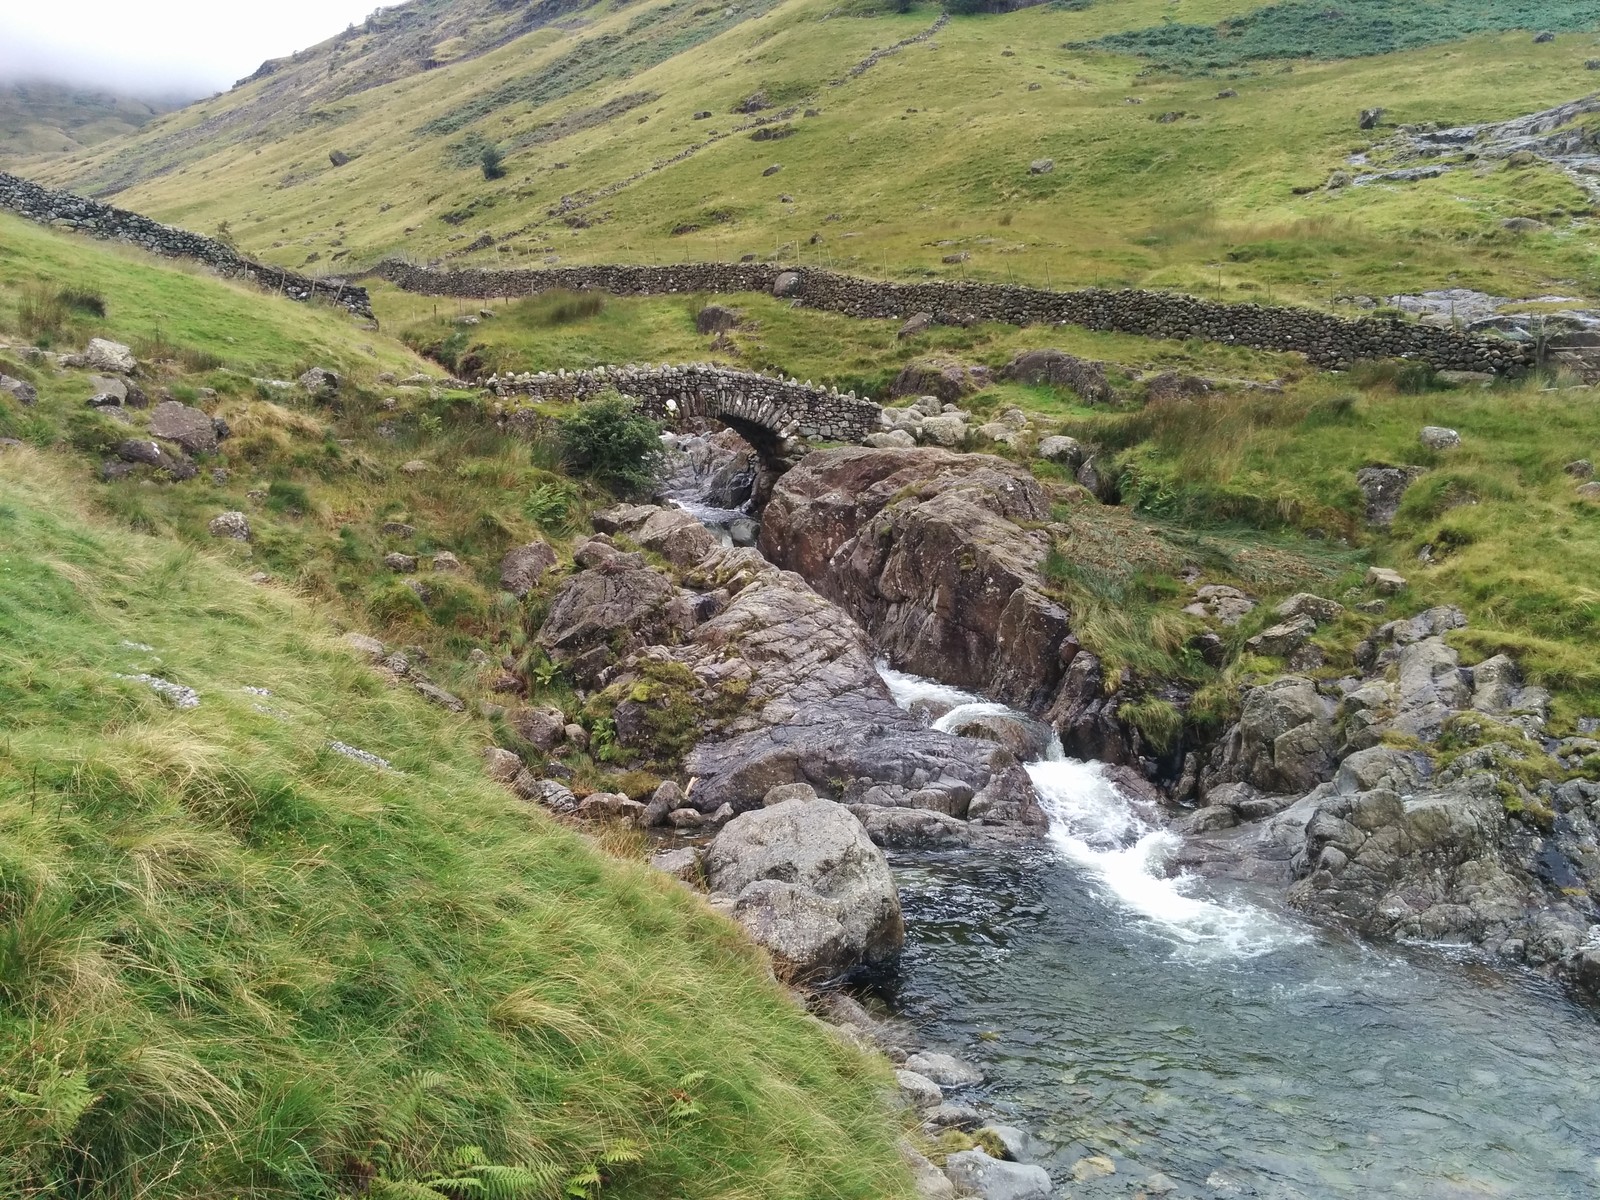 Stockley bridge, on the way to Scafell pike.